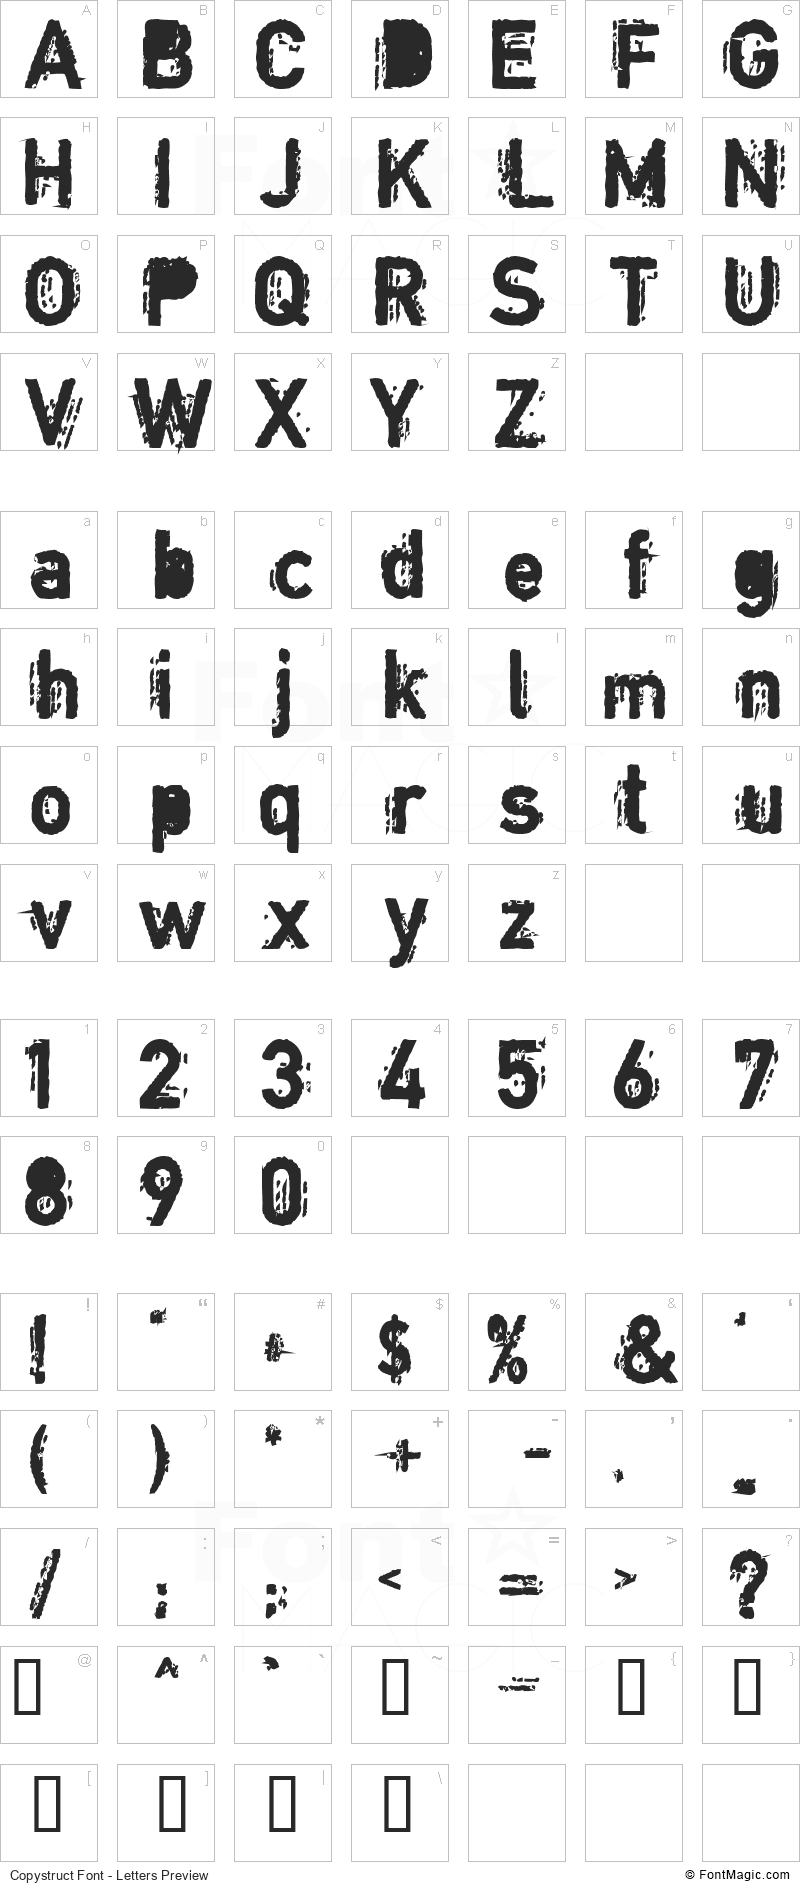 Copystruct Font - All Latters Preview Chart